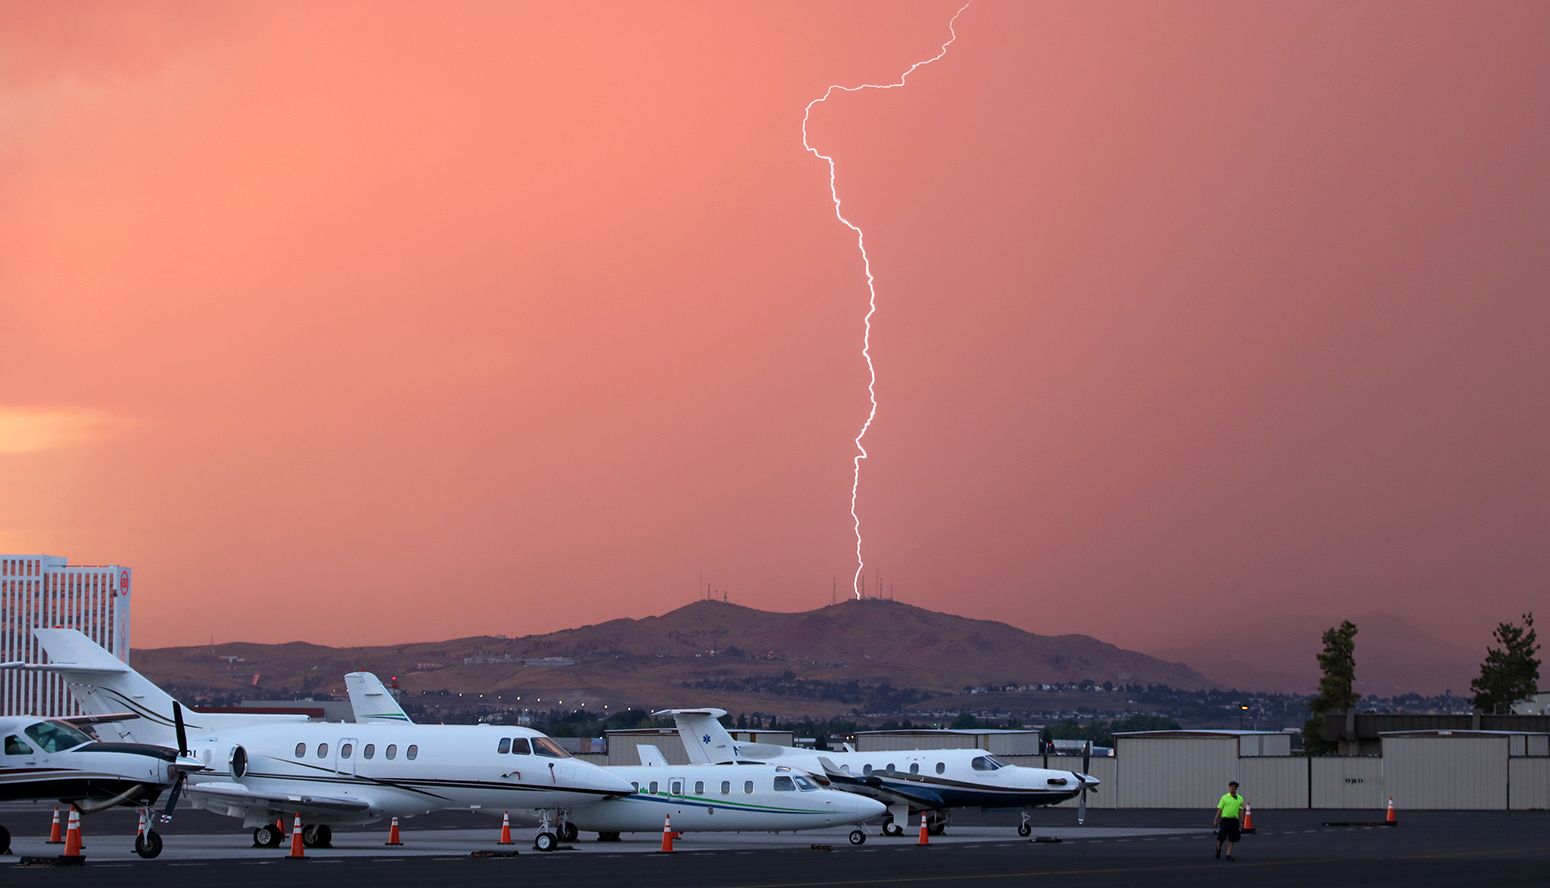 — — - Rain is obscuring the hills north of the airport as a storm moves toward RNO. Shortly after this photo was taken, severe wind sheer at both ends of runways 16R-34L and 16L-34R forced the airport to close for about 30 minutes or so.